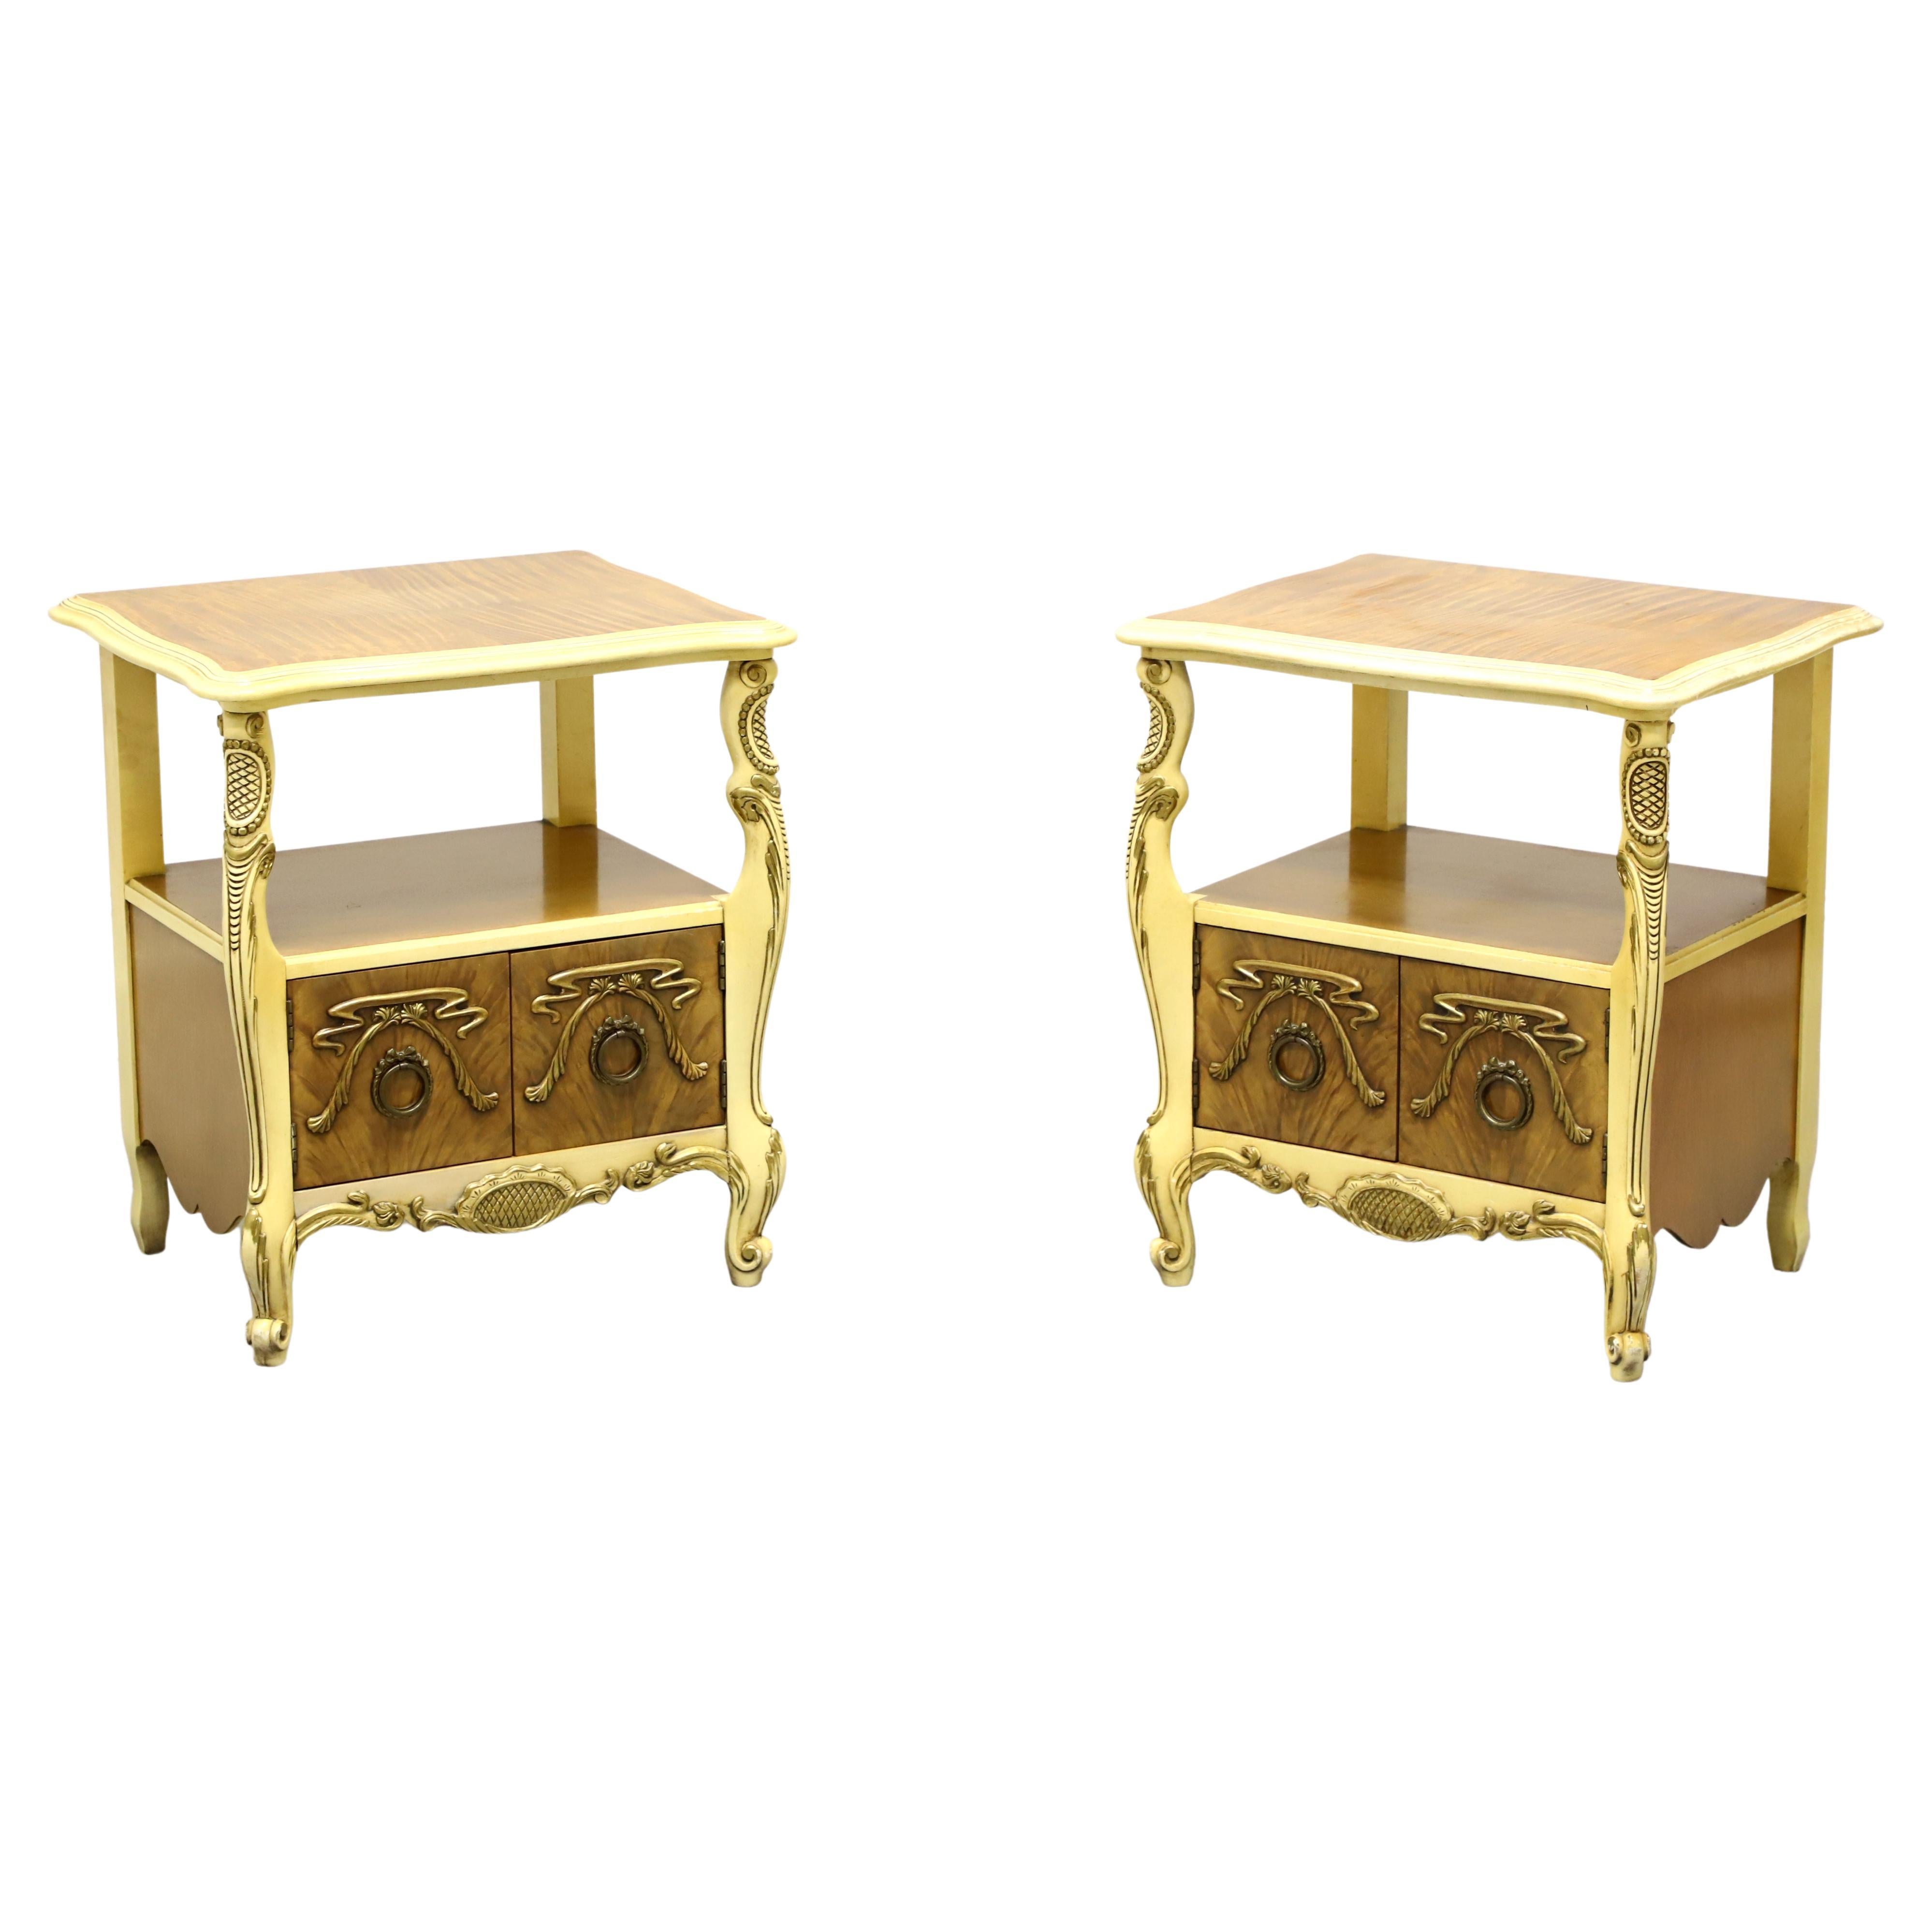 ROMWEBER Mid 20th Century Satinwood French Provincial Nightstands - Pair For Sale